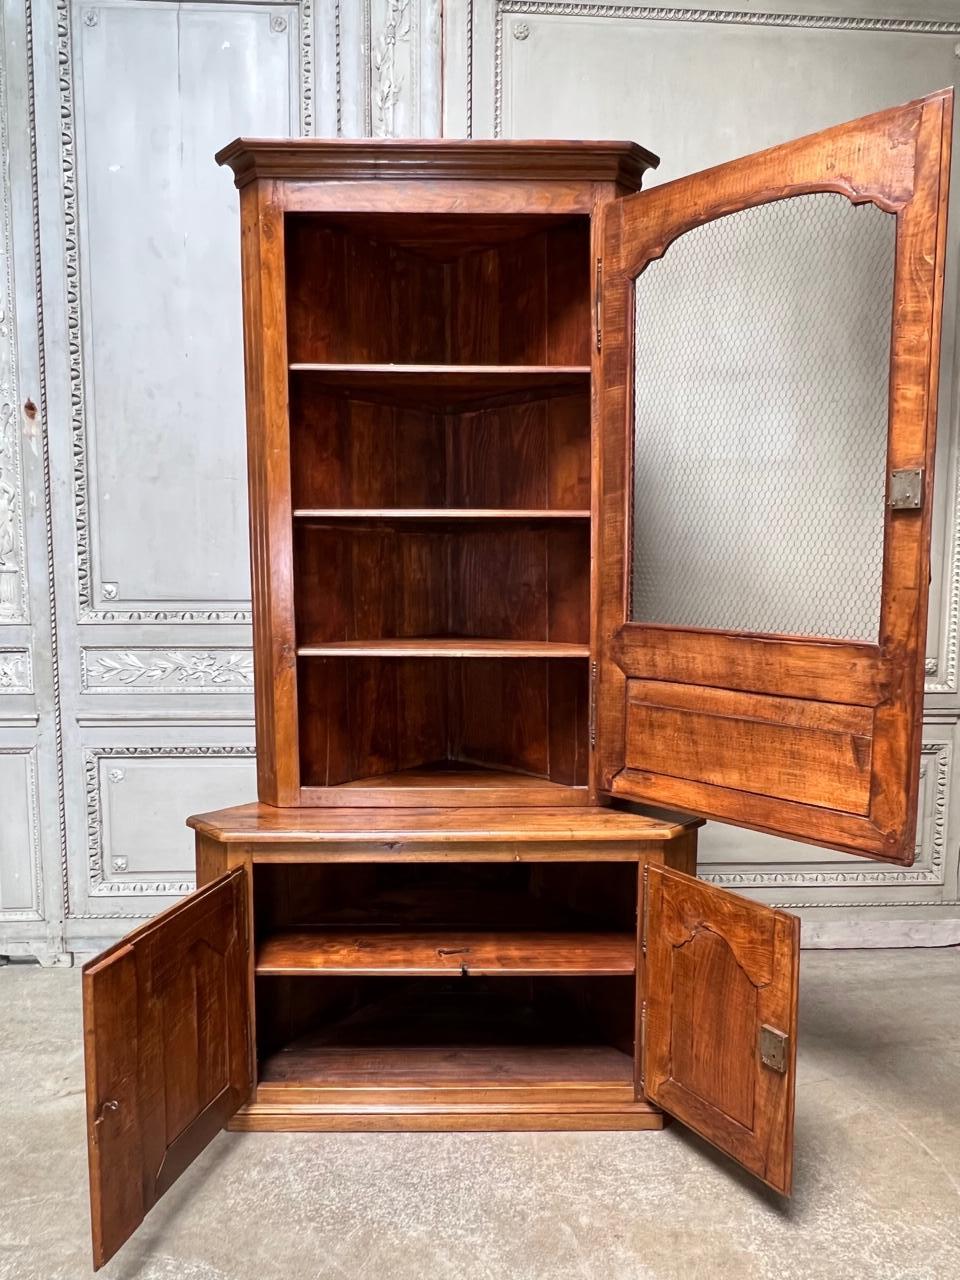 A French Louis XVI style country French walnut corner cabinet with chicken wire in the door. This beautiful cabinet as a wondeful patina and is probably late 18th century rather than mid 19th as listed. It was more than likely built in so it appears